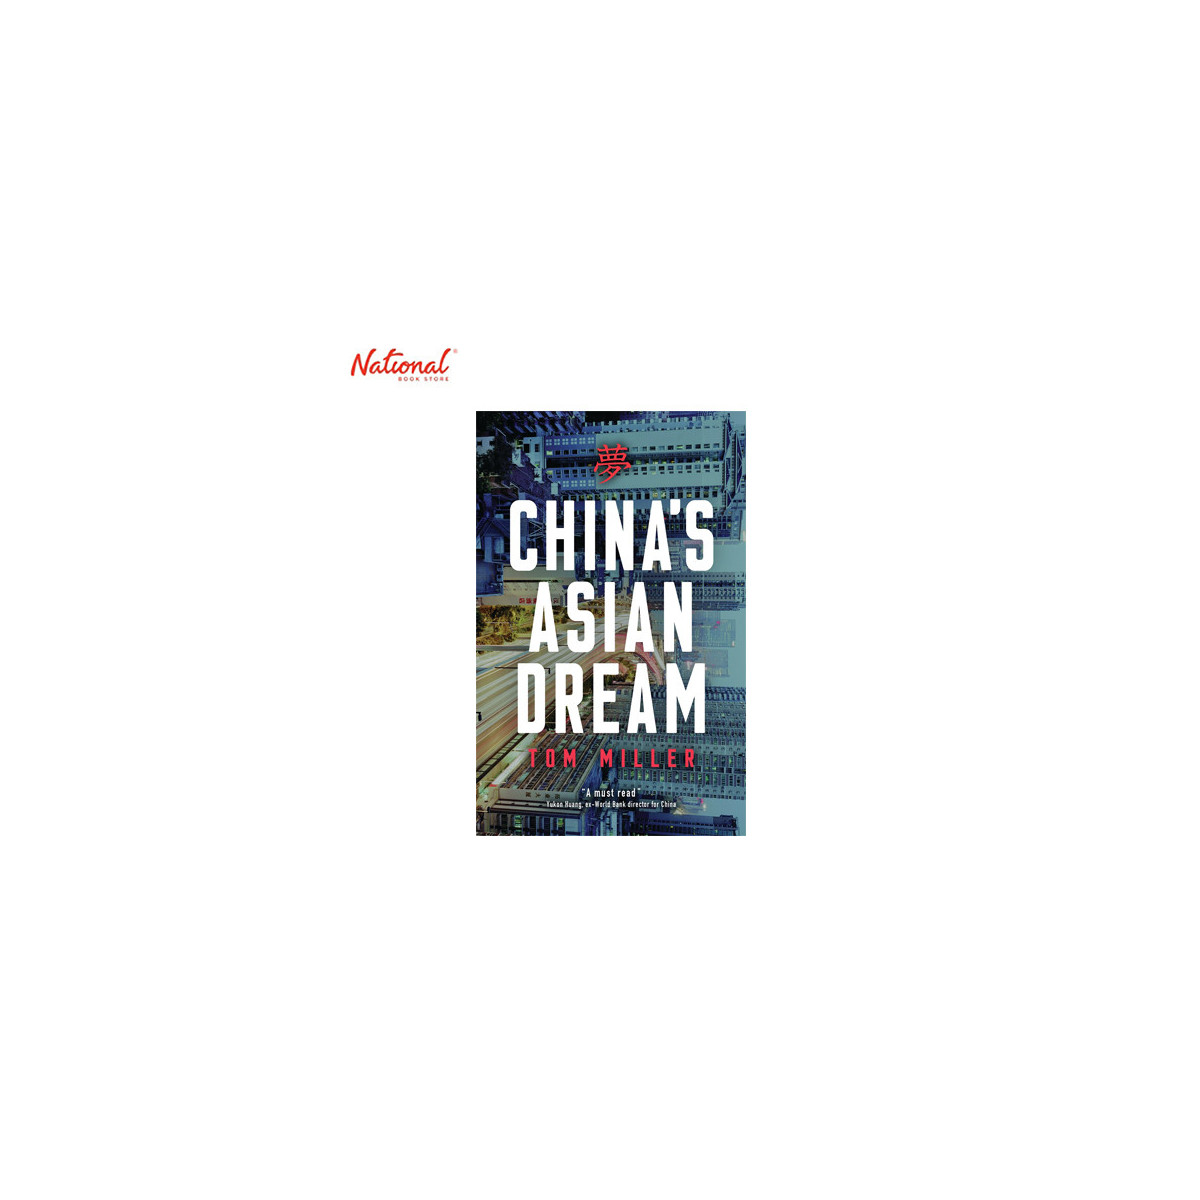 China's Asian Dream Trade Paperback by Tom Miller